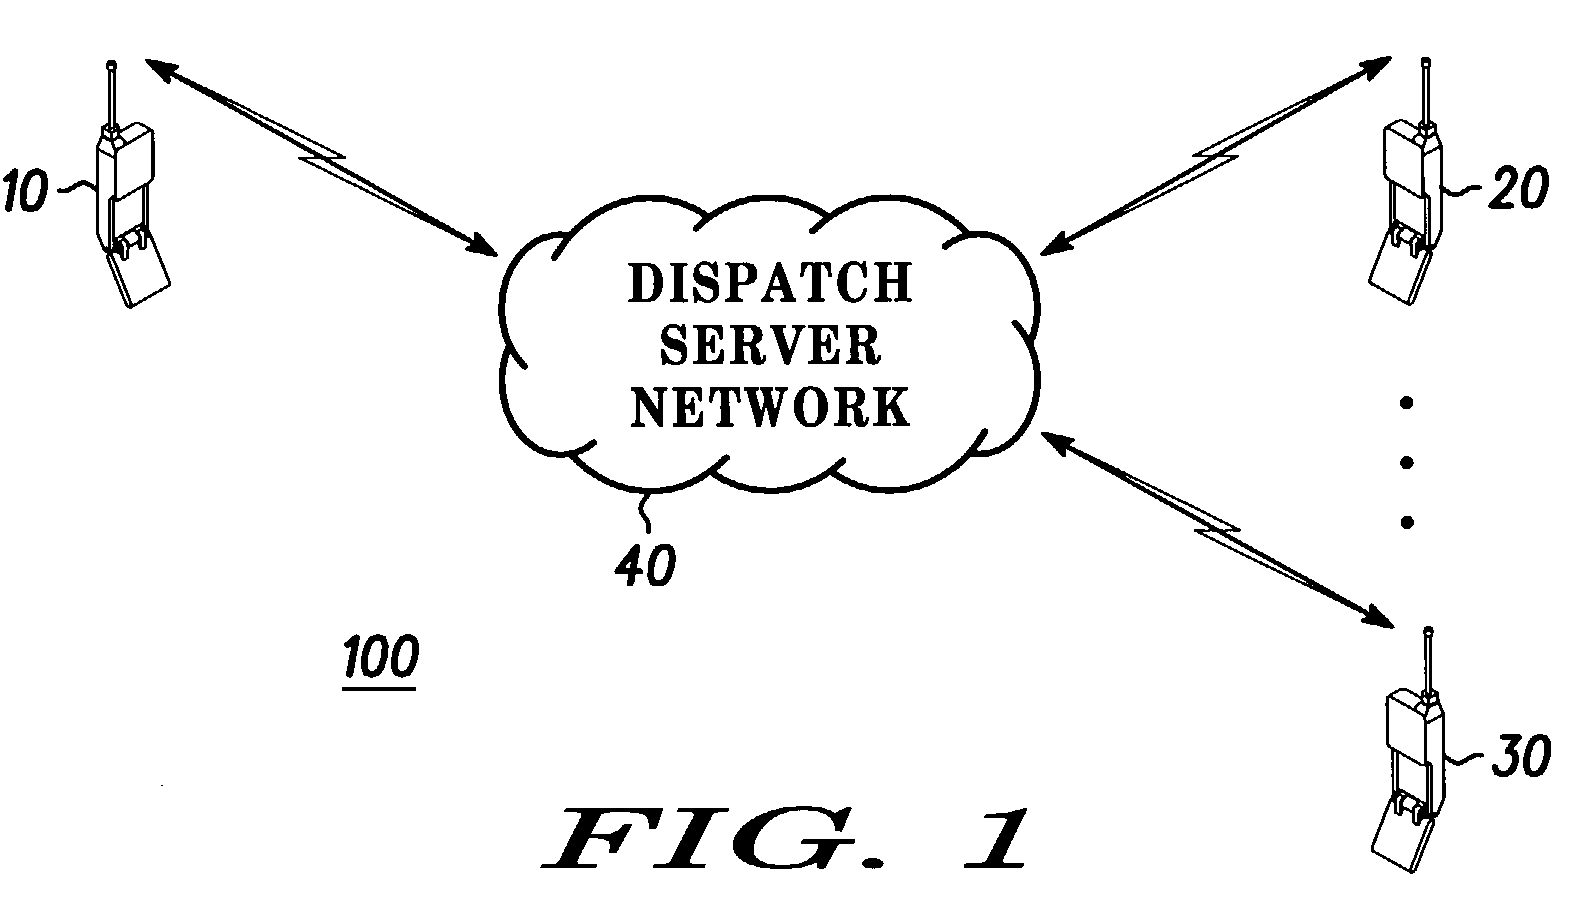 Push-to-talk call setup for a mobile packet data dispatch network